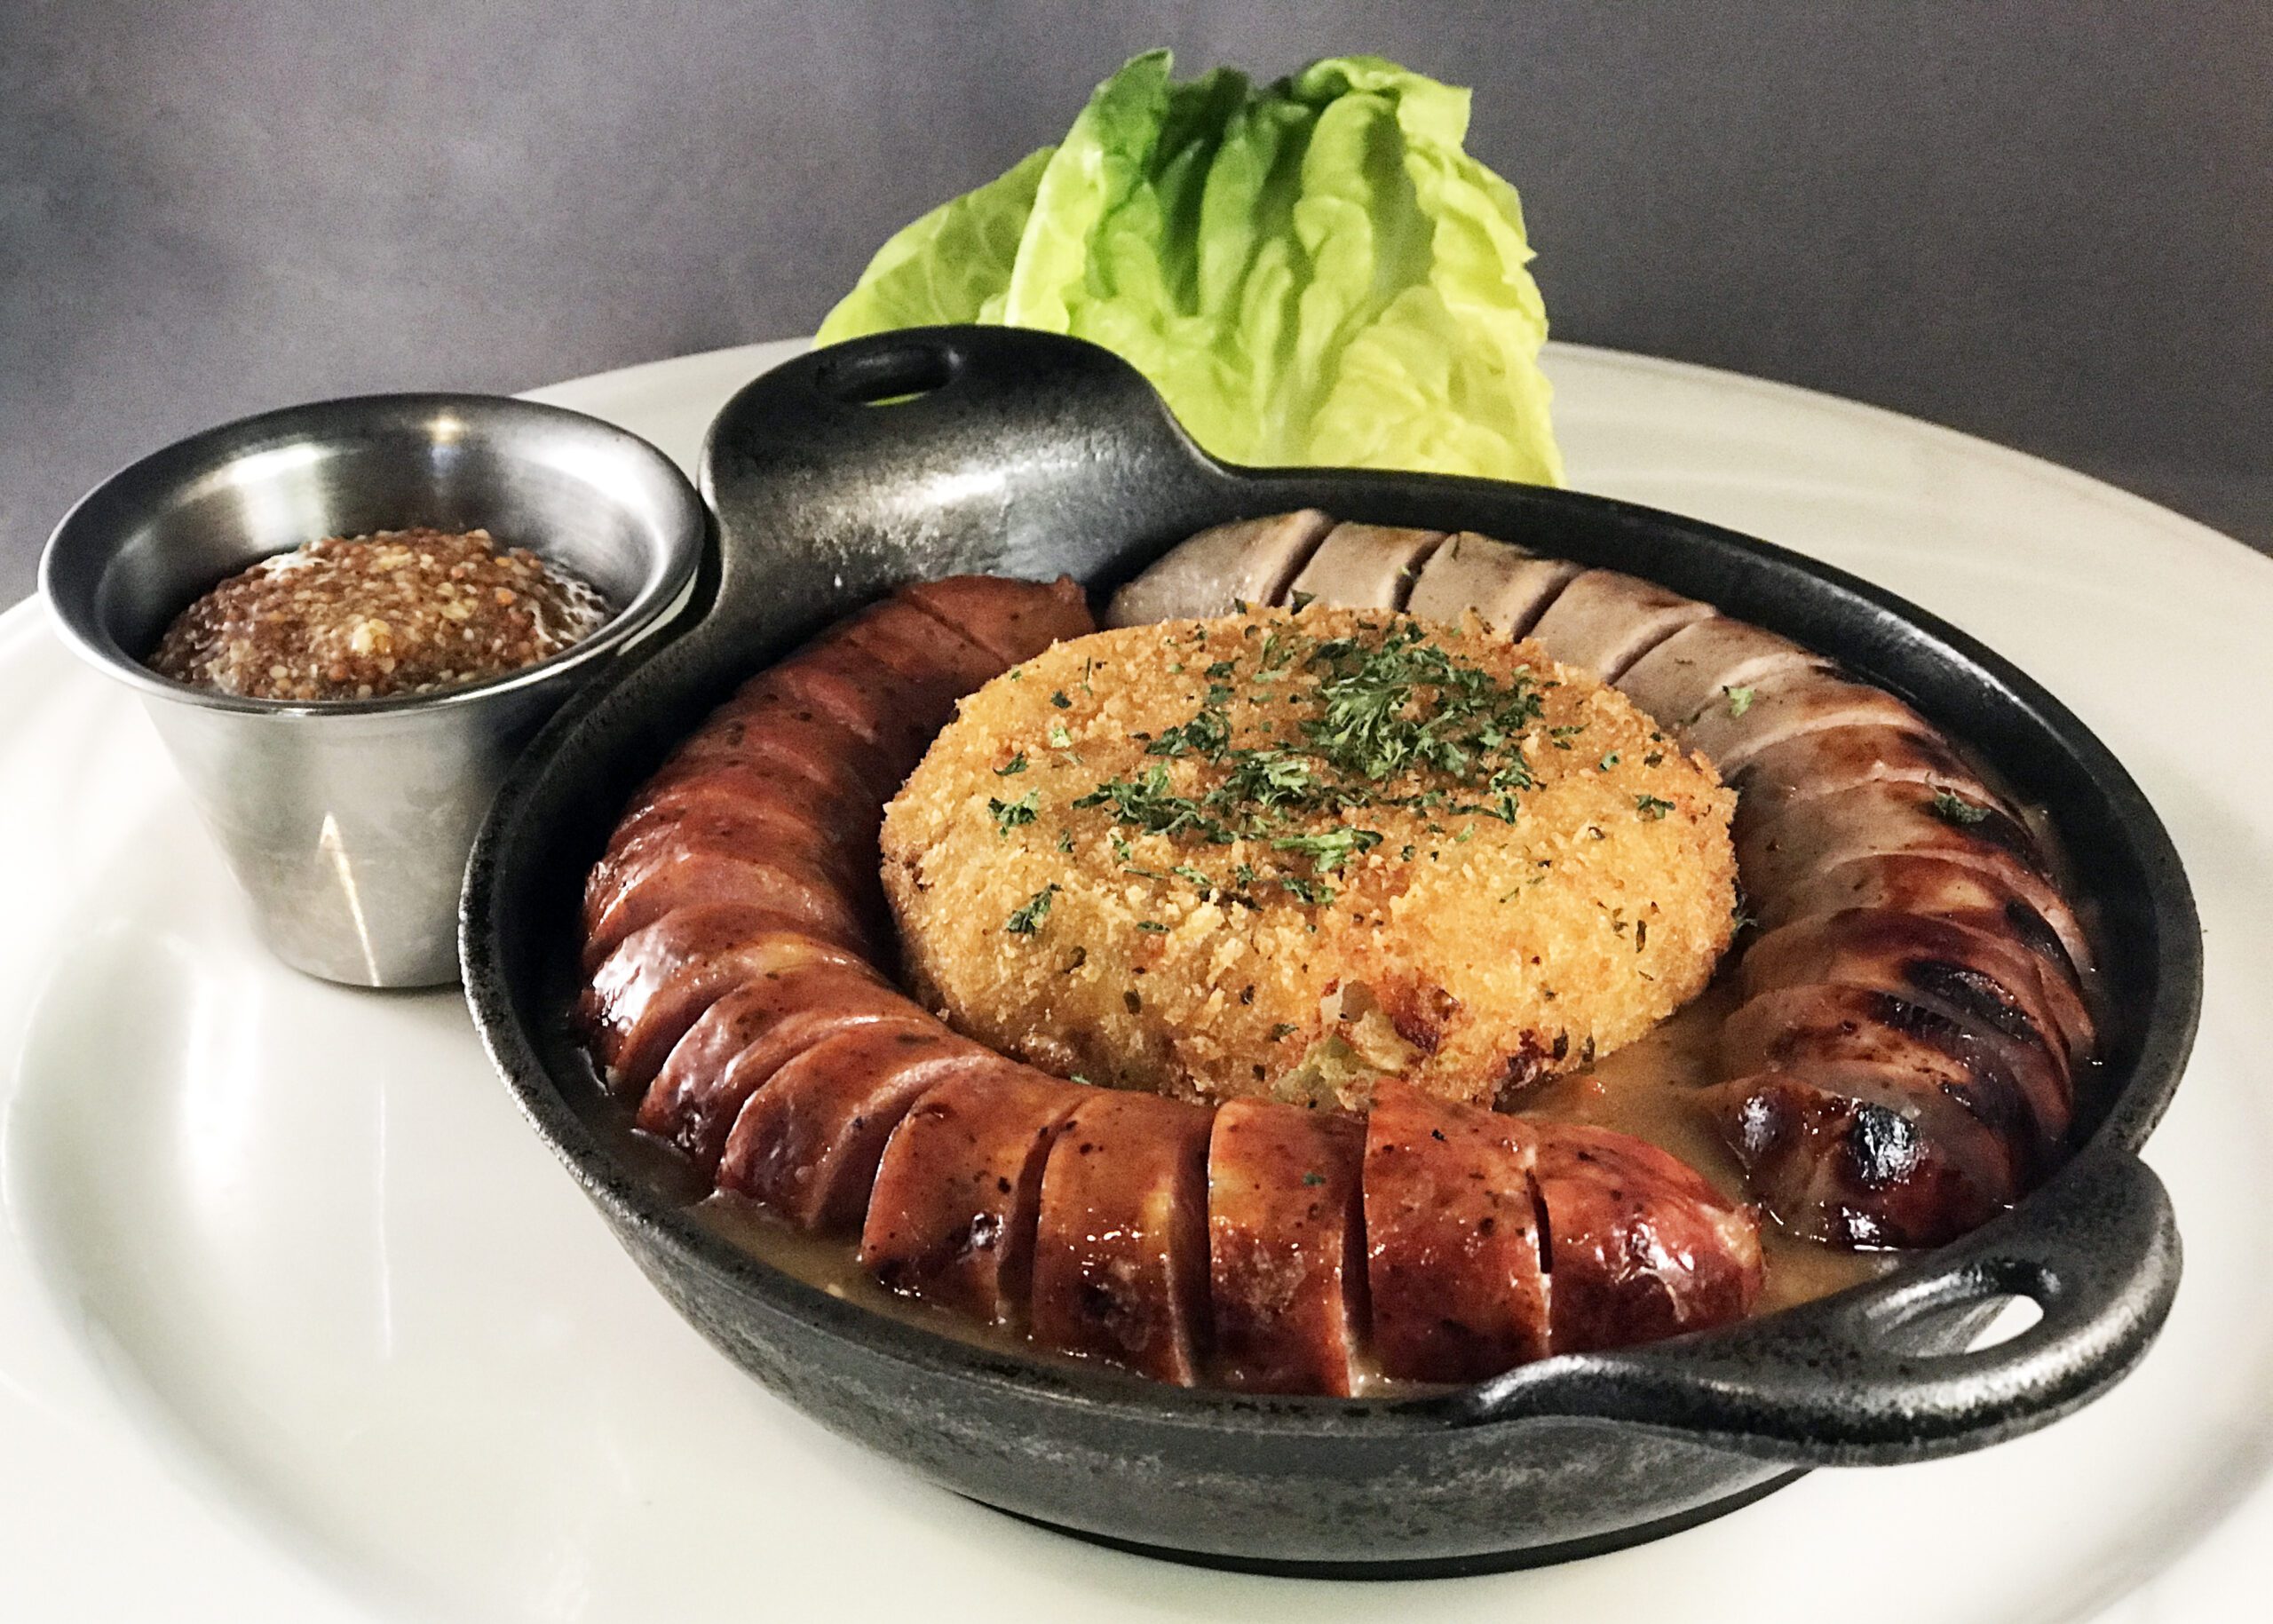 Bison Bangers and Mash from Henrys Pub in Loveland, Colorado.